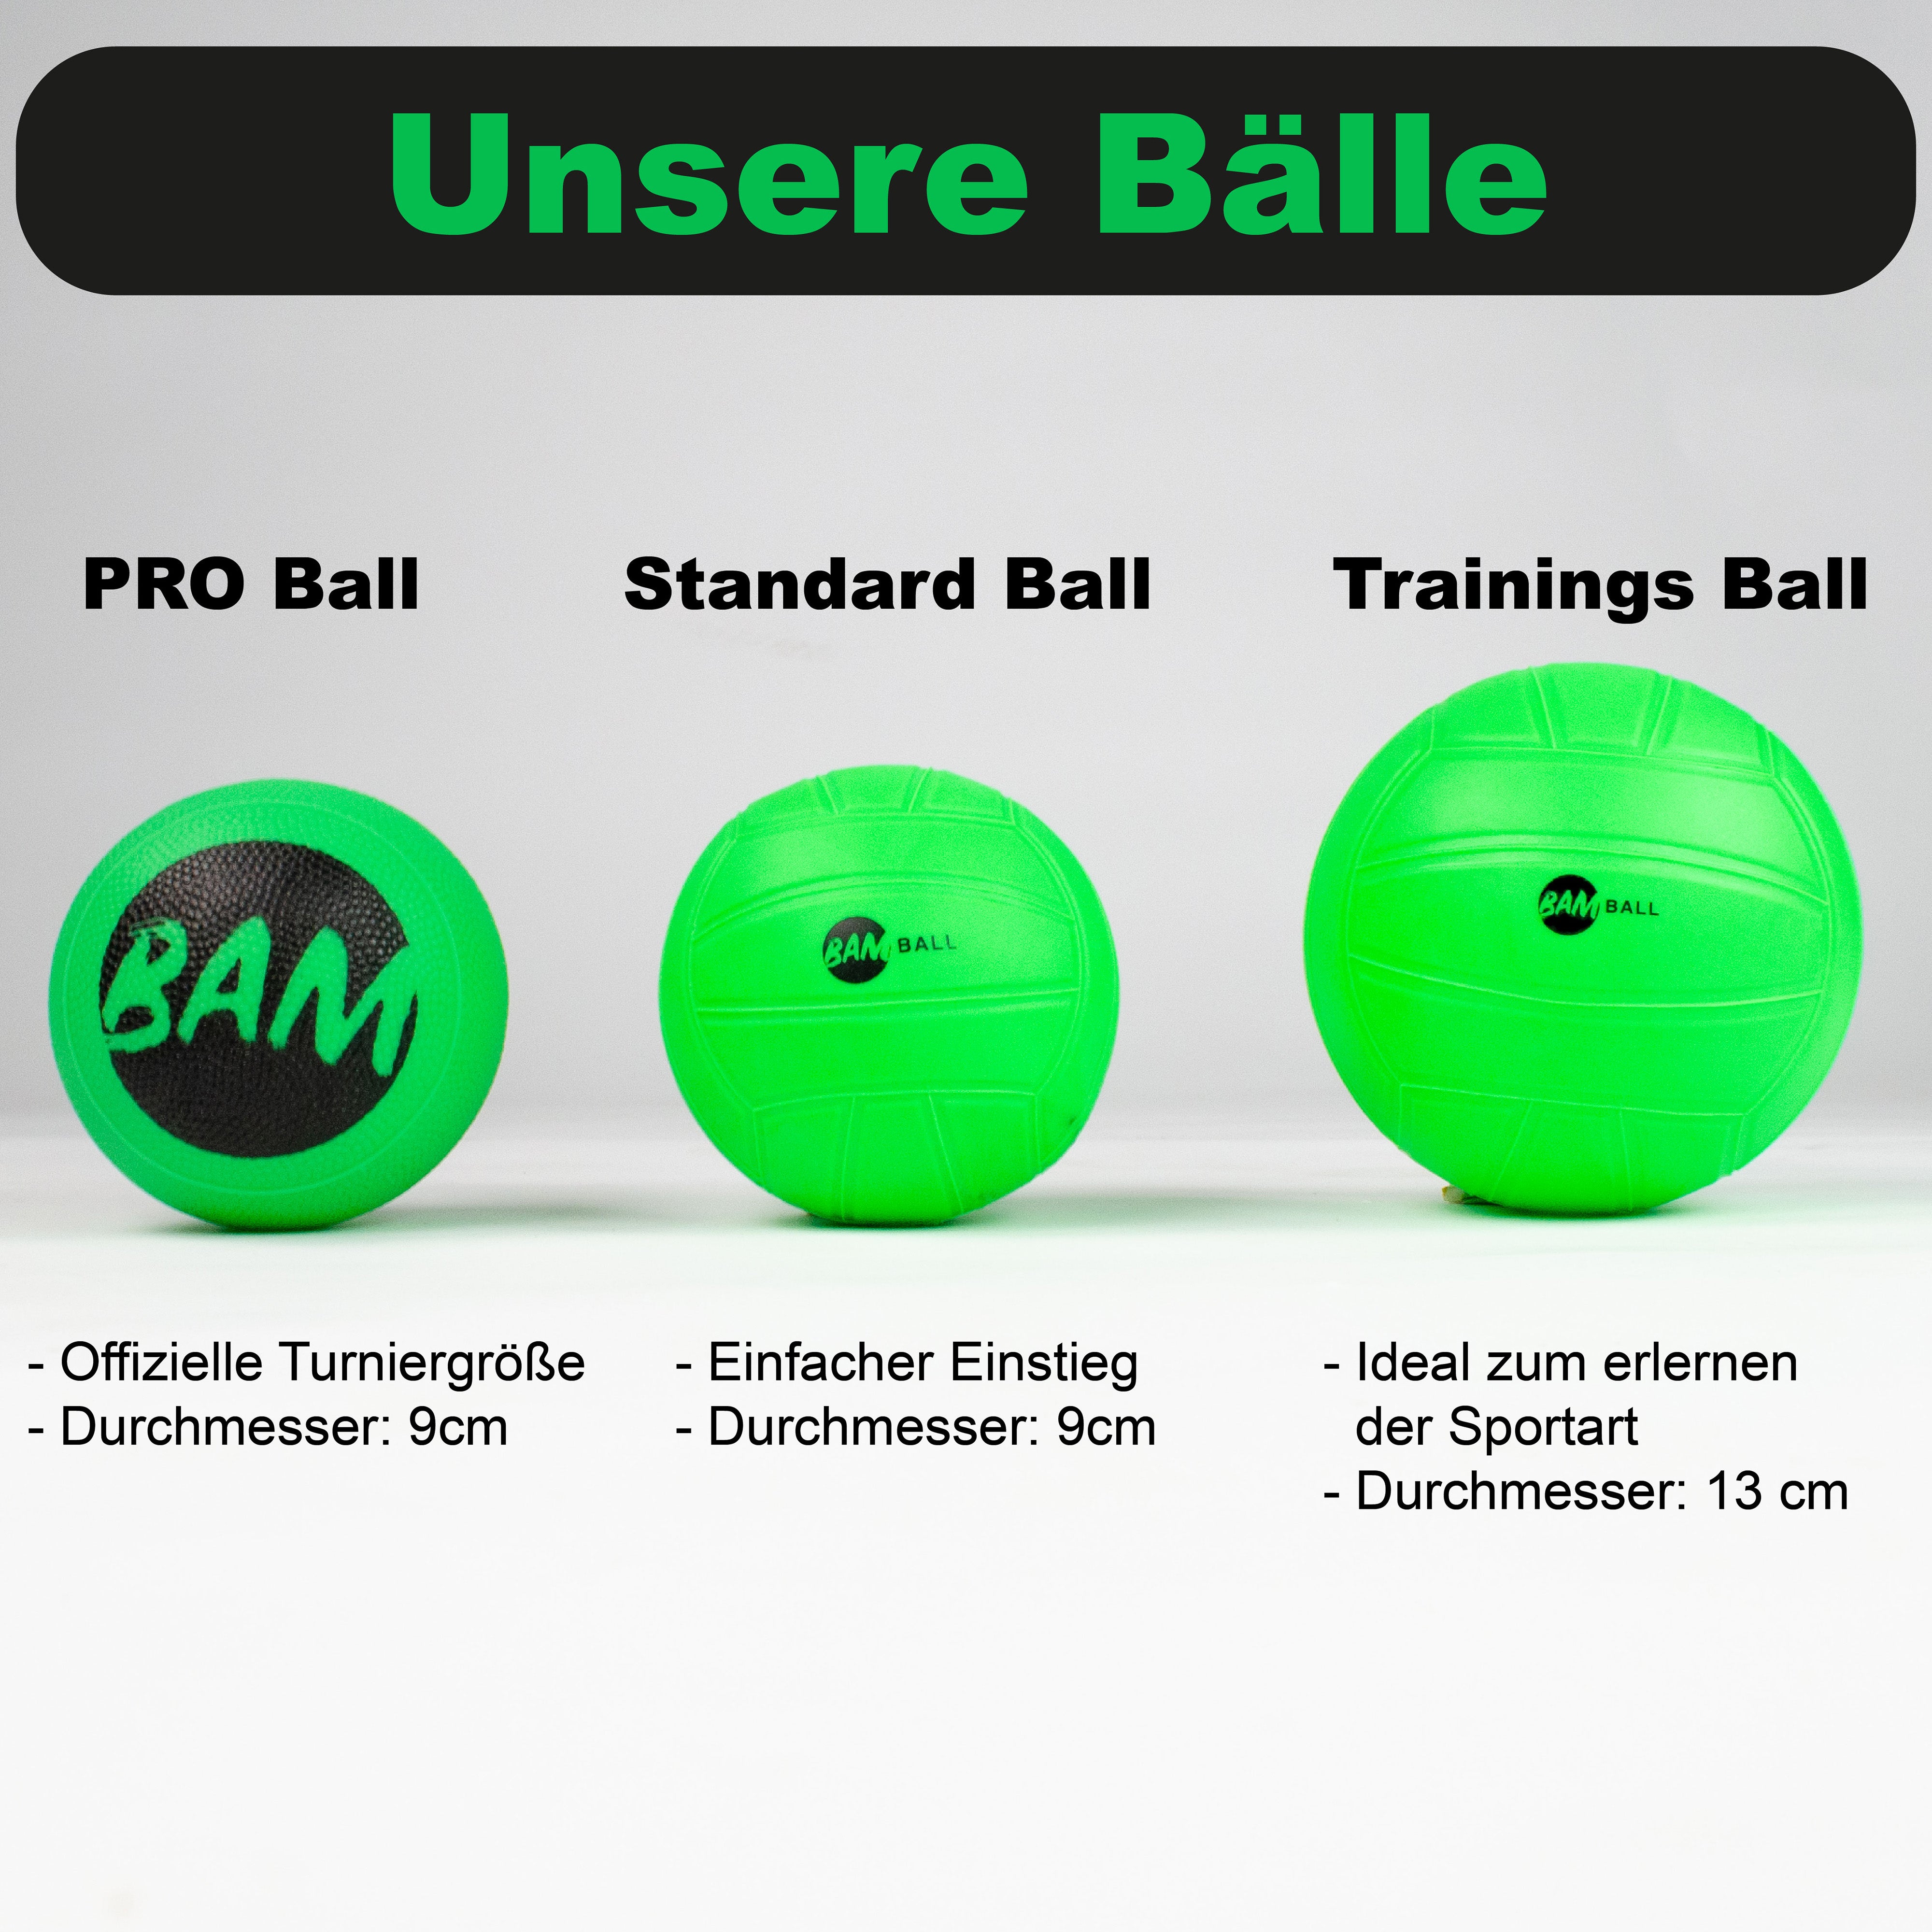 BamBall extra Spielball Pack